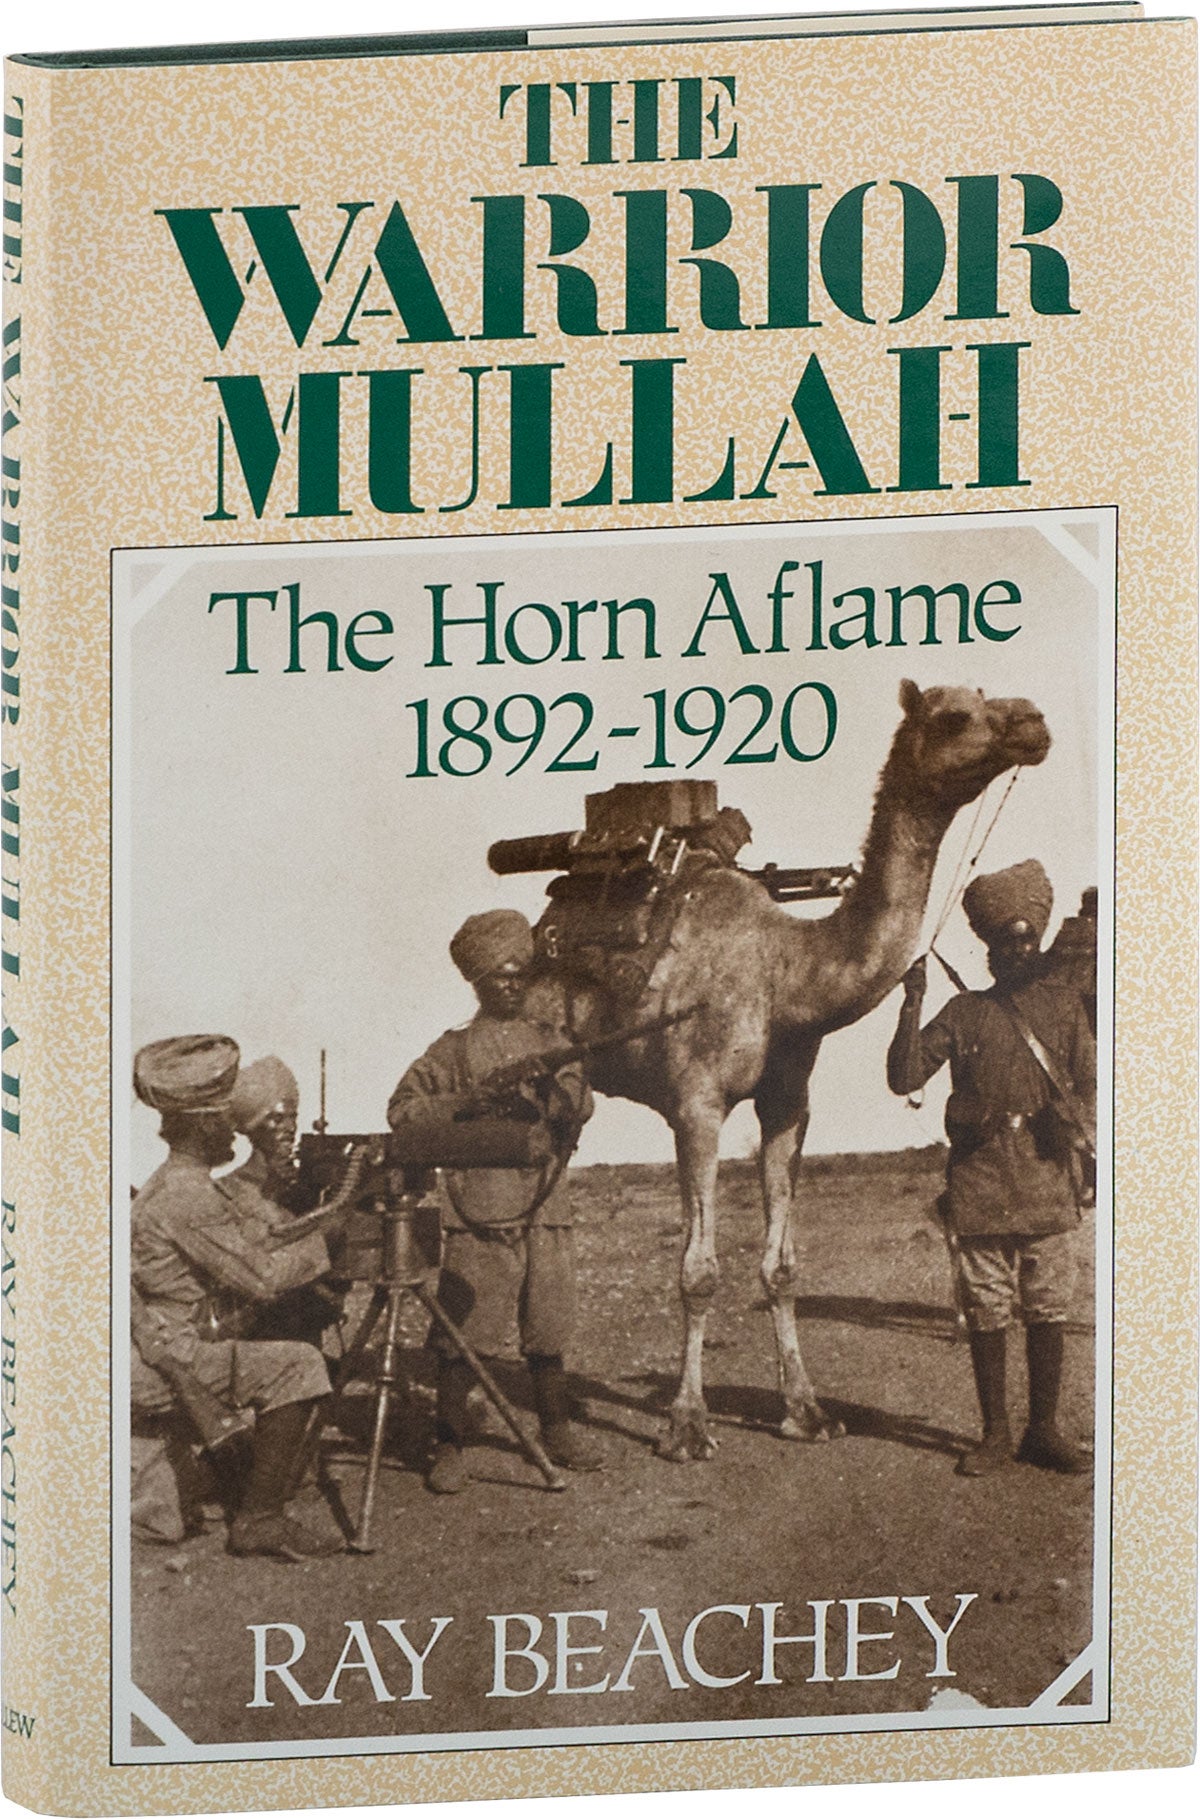 [Item #80759] The Warrior Mullah; The Horn Aflame 1892-1920. Ray BEACHEY.